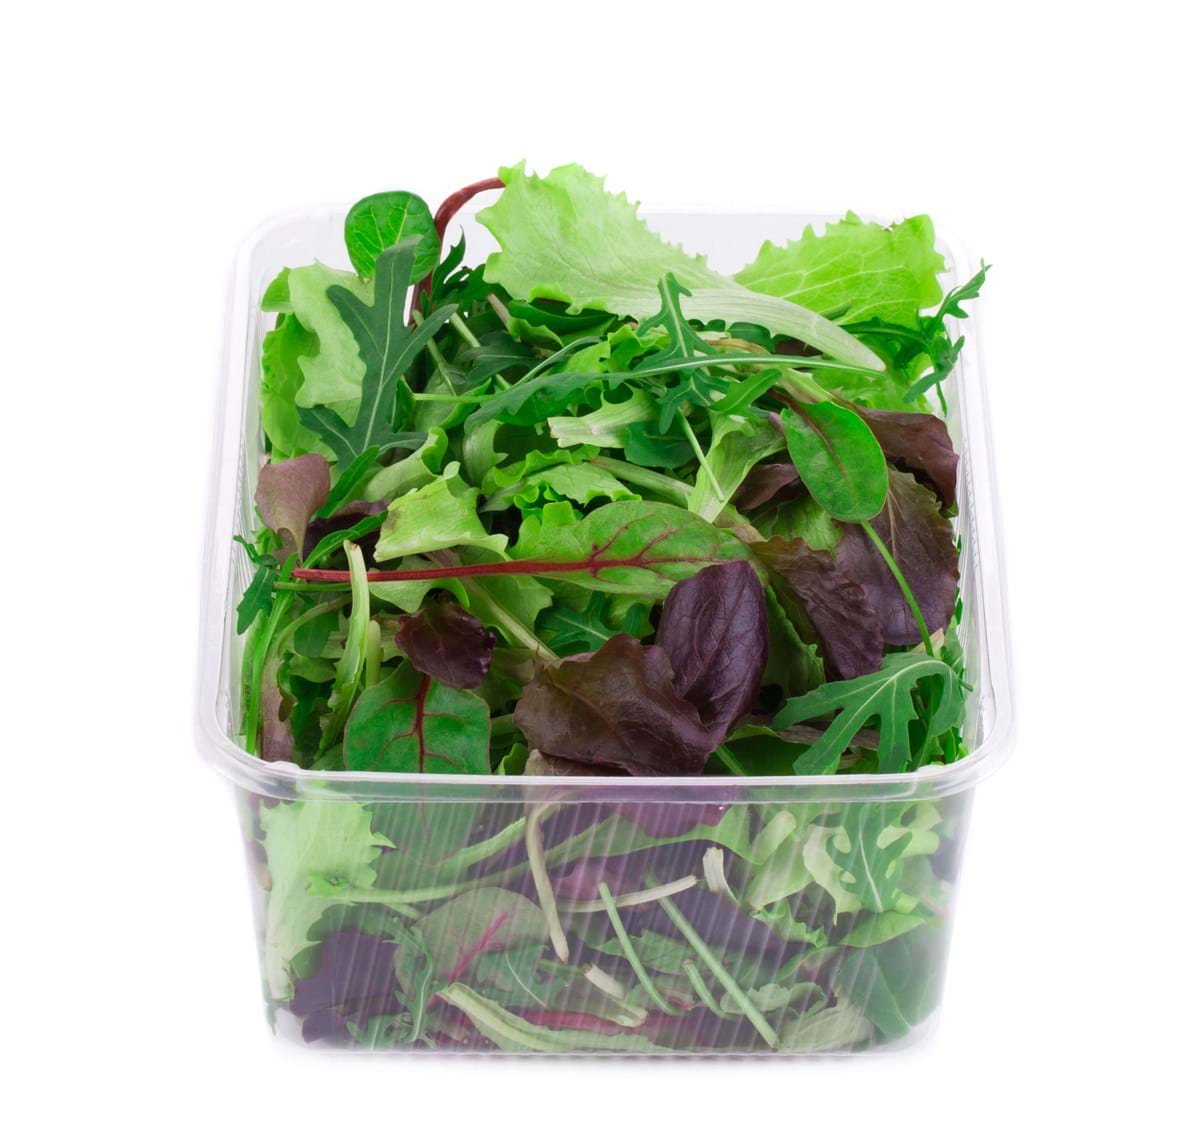 Salad in a plastic container